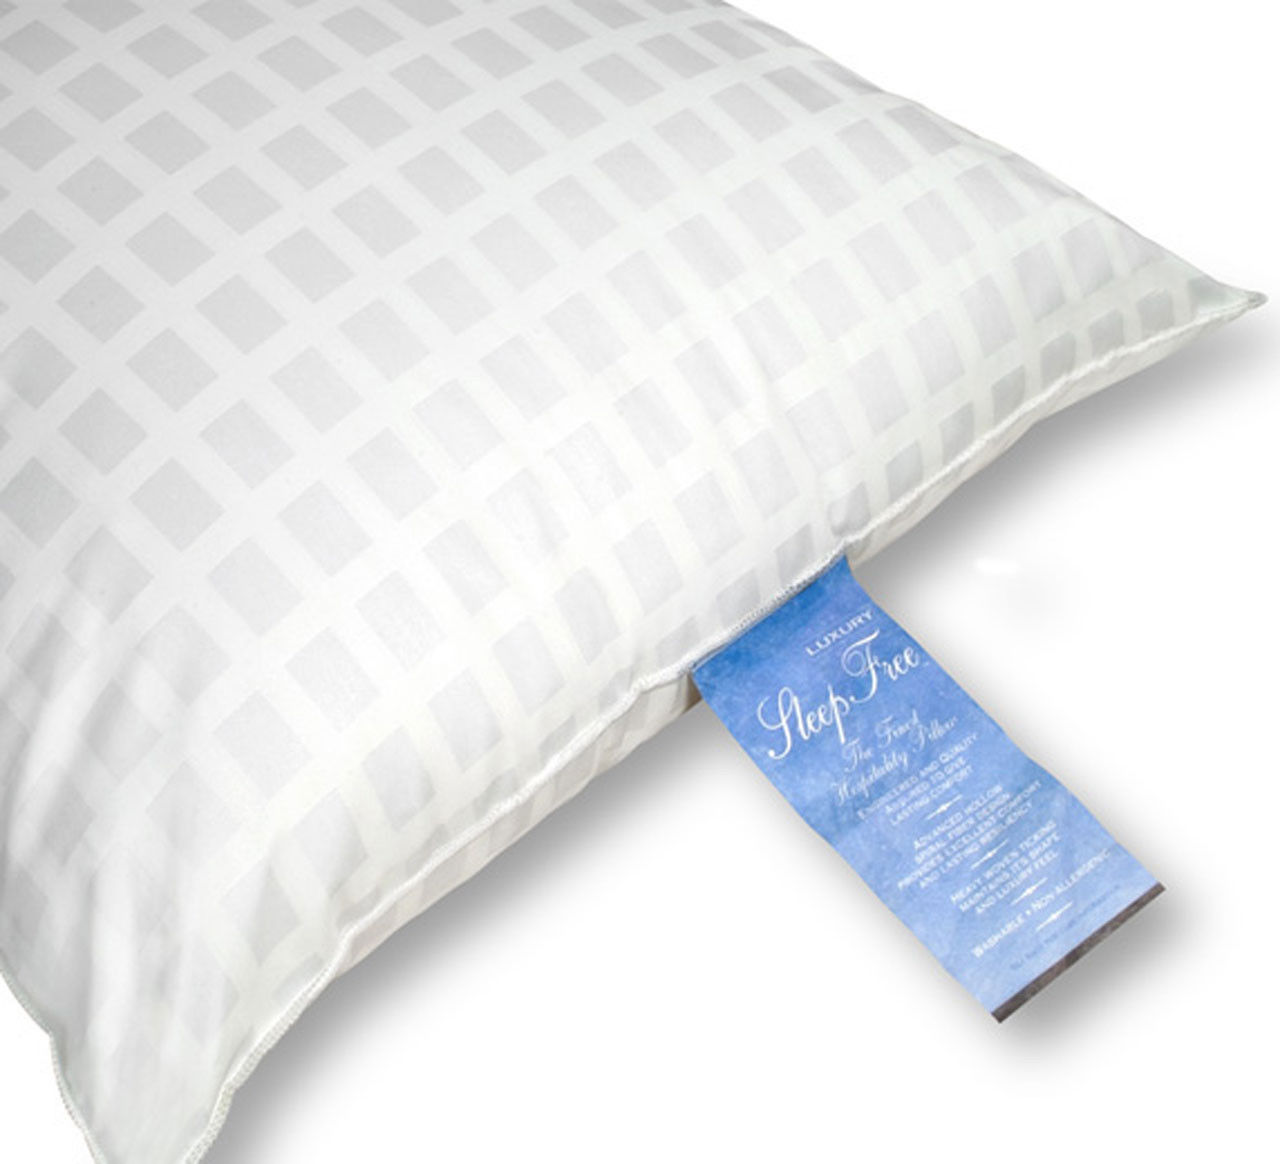 Can you tell me the manufacturing location of the Sleep Free Pillow?